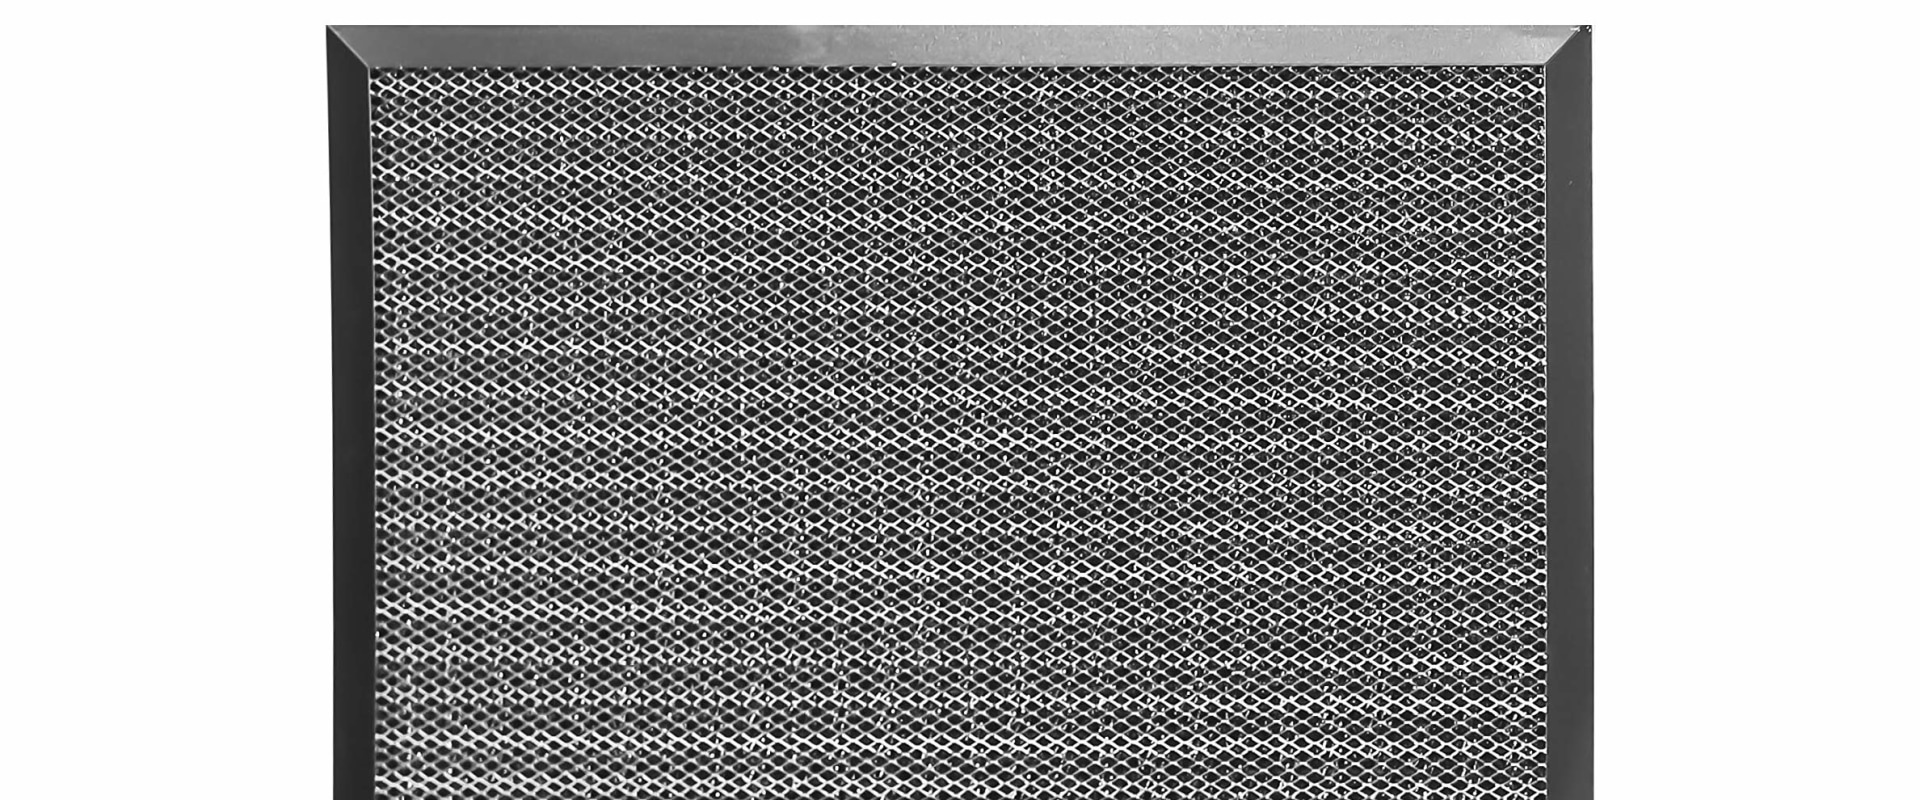 Do I Need to Use an Electrostatic 20x25x1 Air Filter?